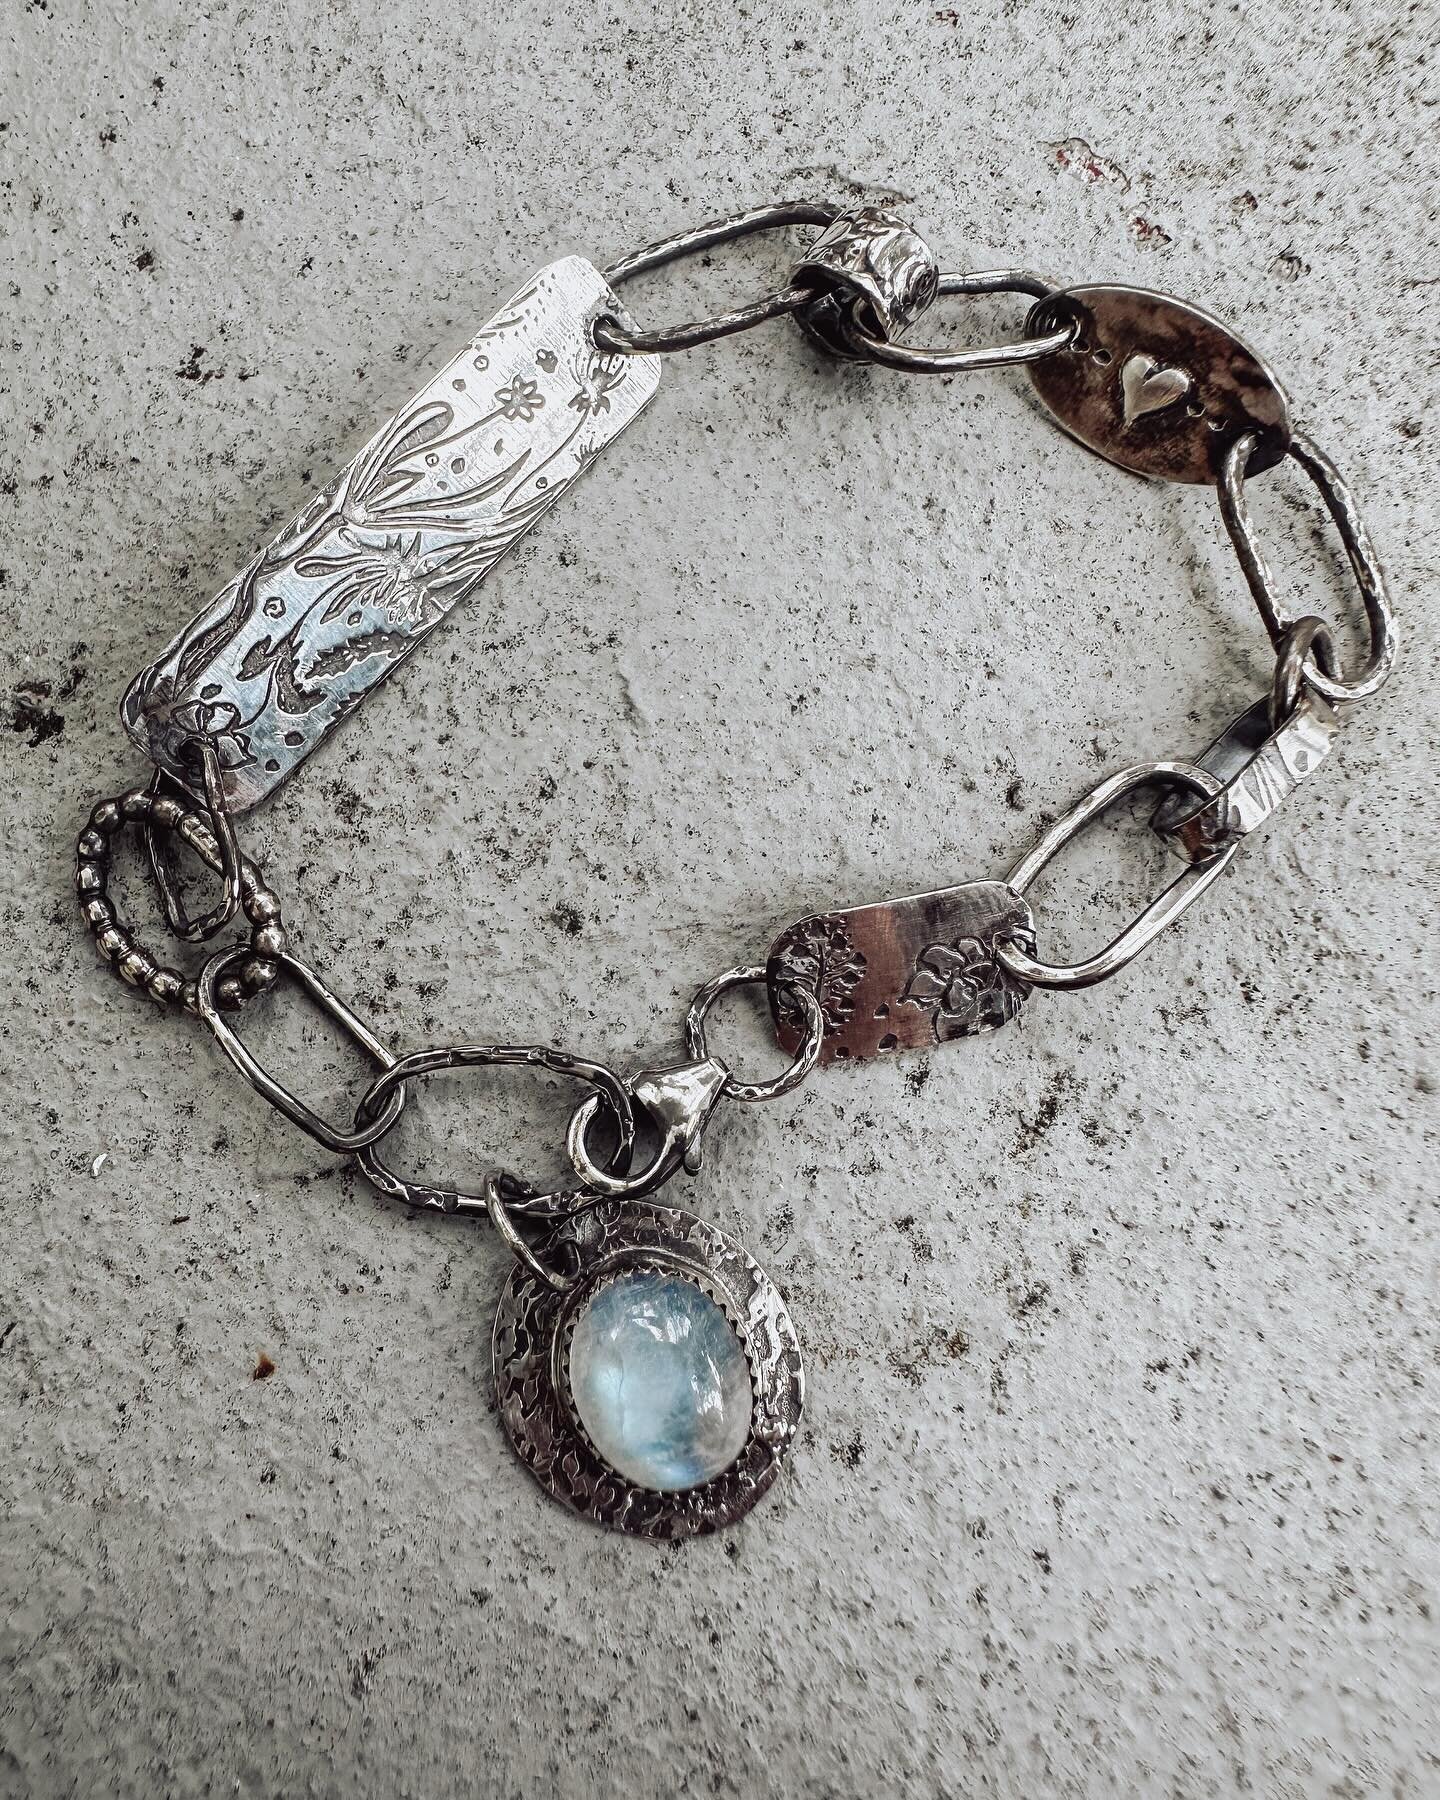 Wildflower reflections bracelet is up on the website now. I&rsquo;ll also be at the Venice Art Classic this weekend 

.
#jewelrydesigner #jewelryaddict #bohostyle #bohojewelry #floridaartist #wildflowers #craevia